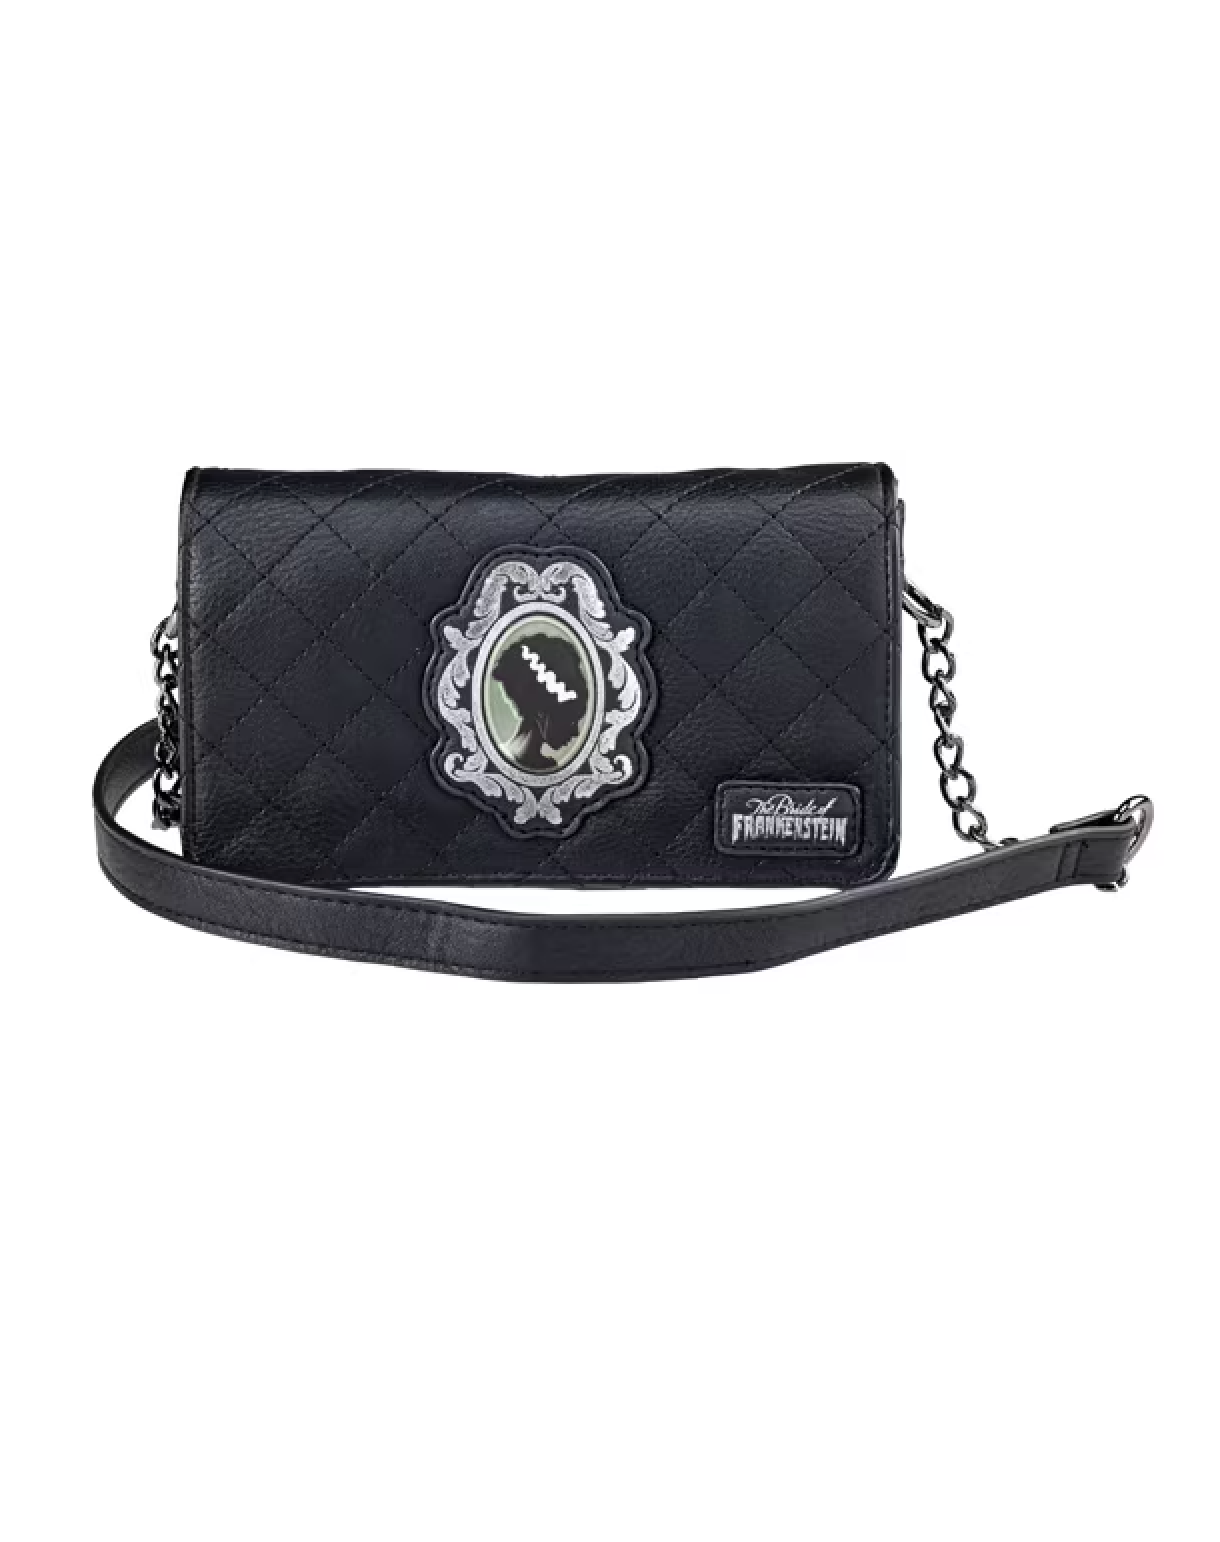 Universal Studios Bride of Frankenstein Crossbody Bag New With Tag